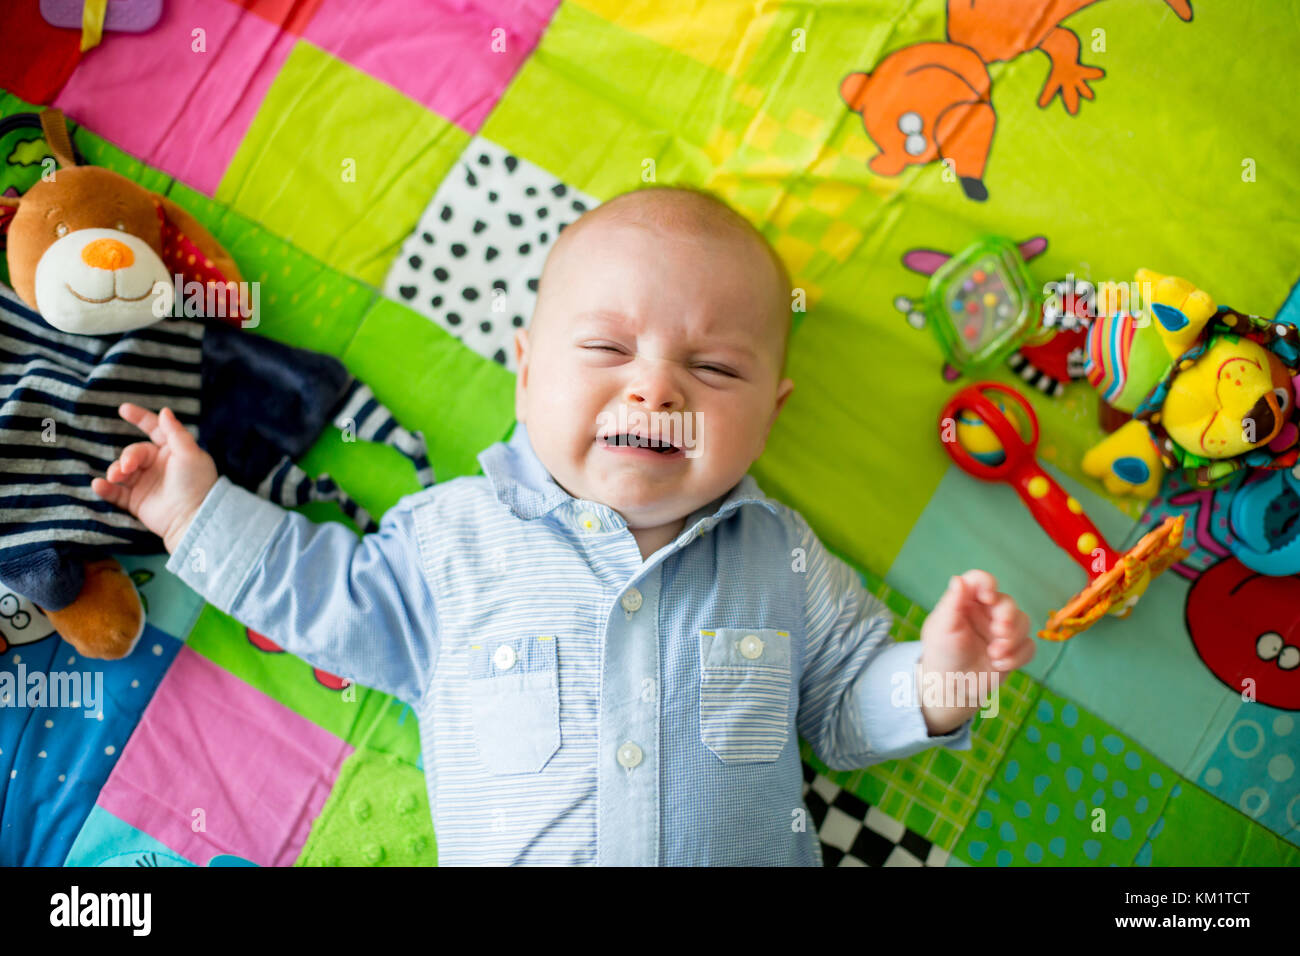 Three months old baby boy, crying at home on a colorful activity blanket, toys and different activity around him Stock Photo